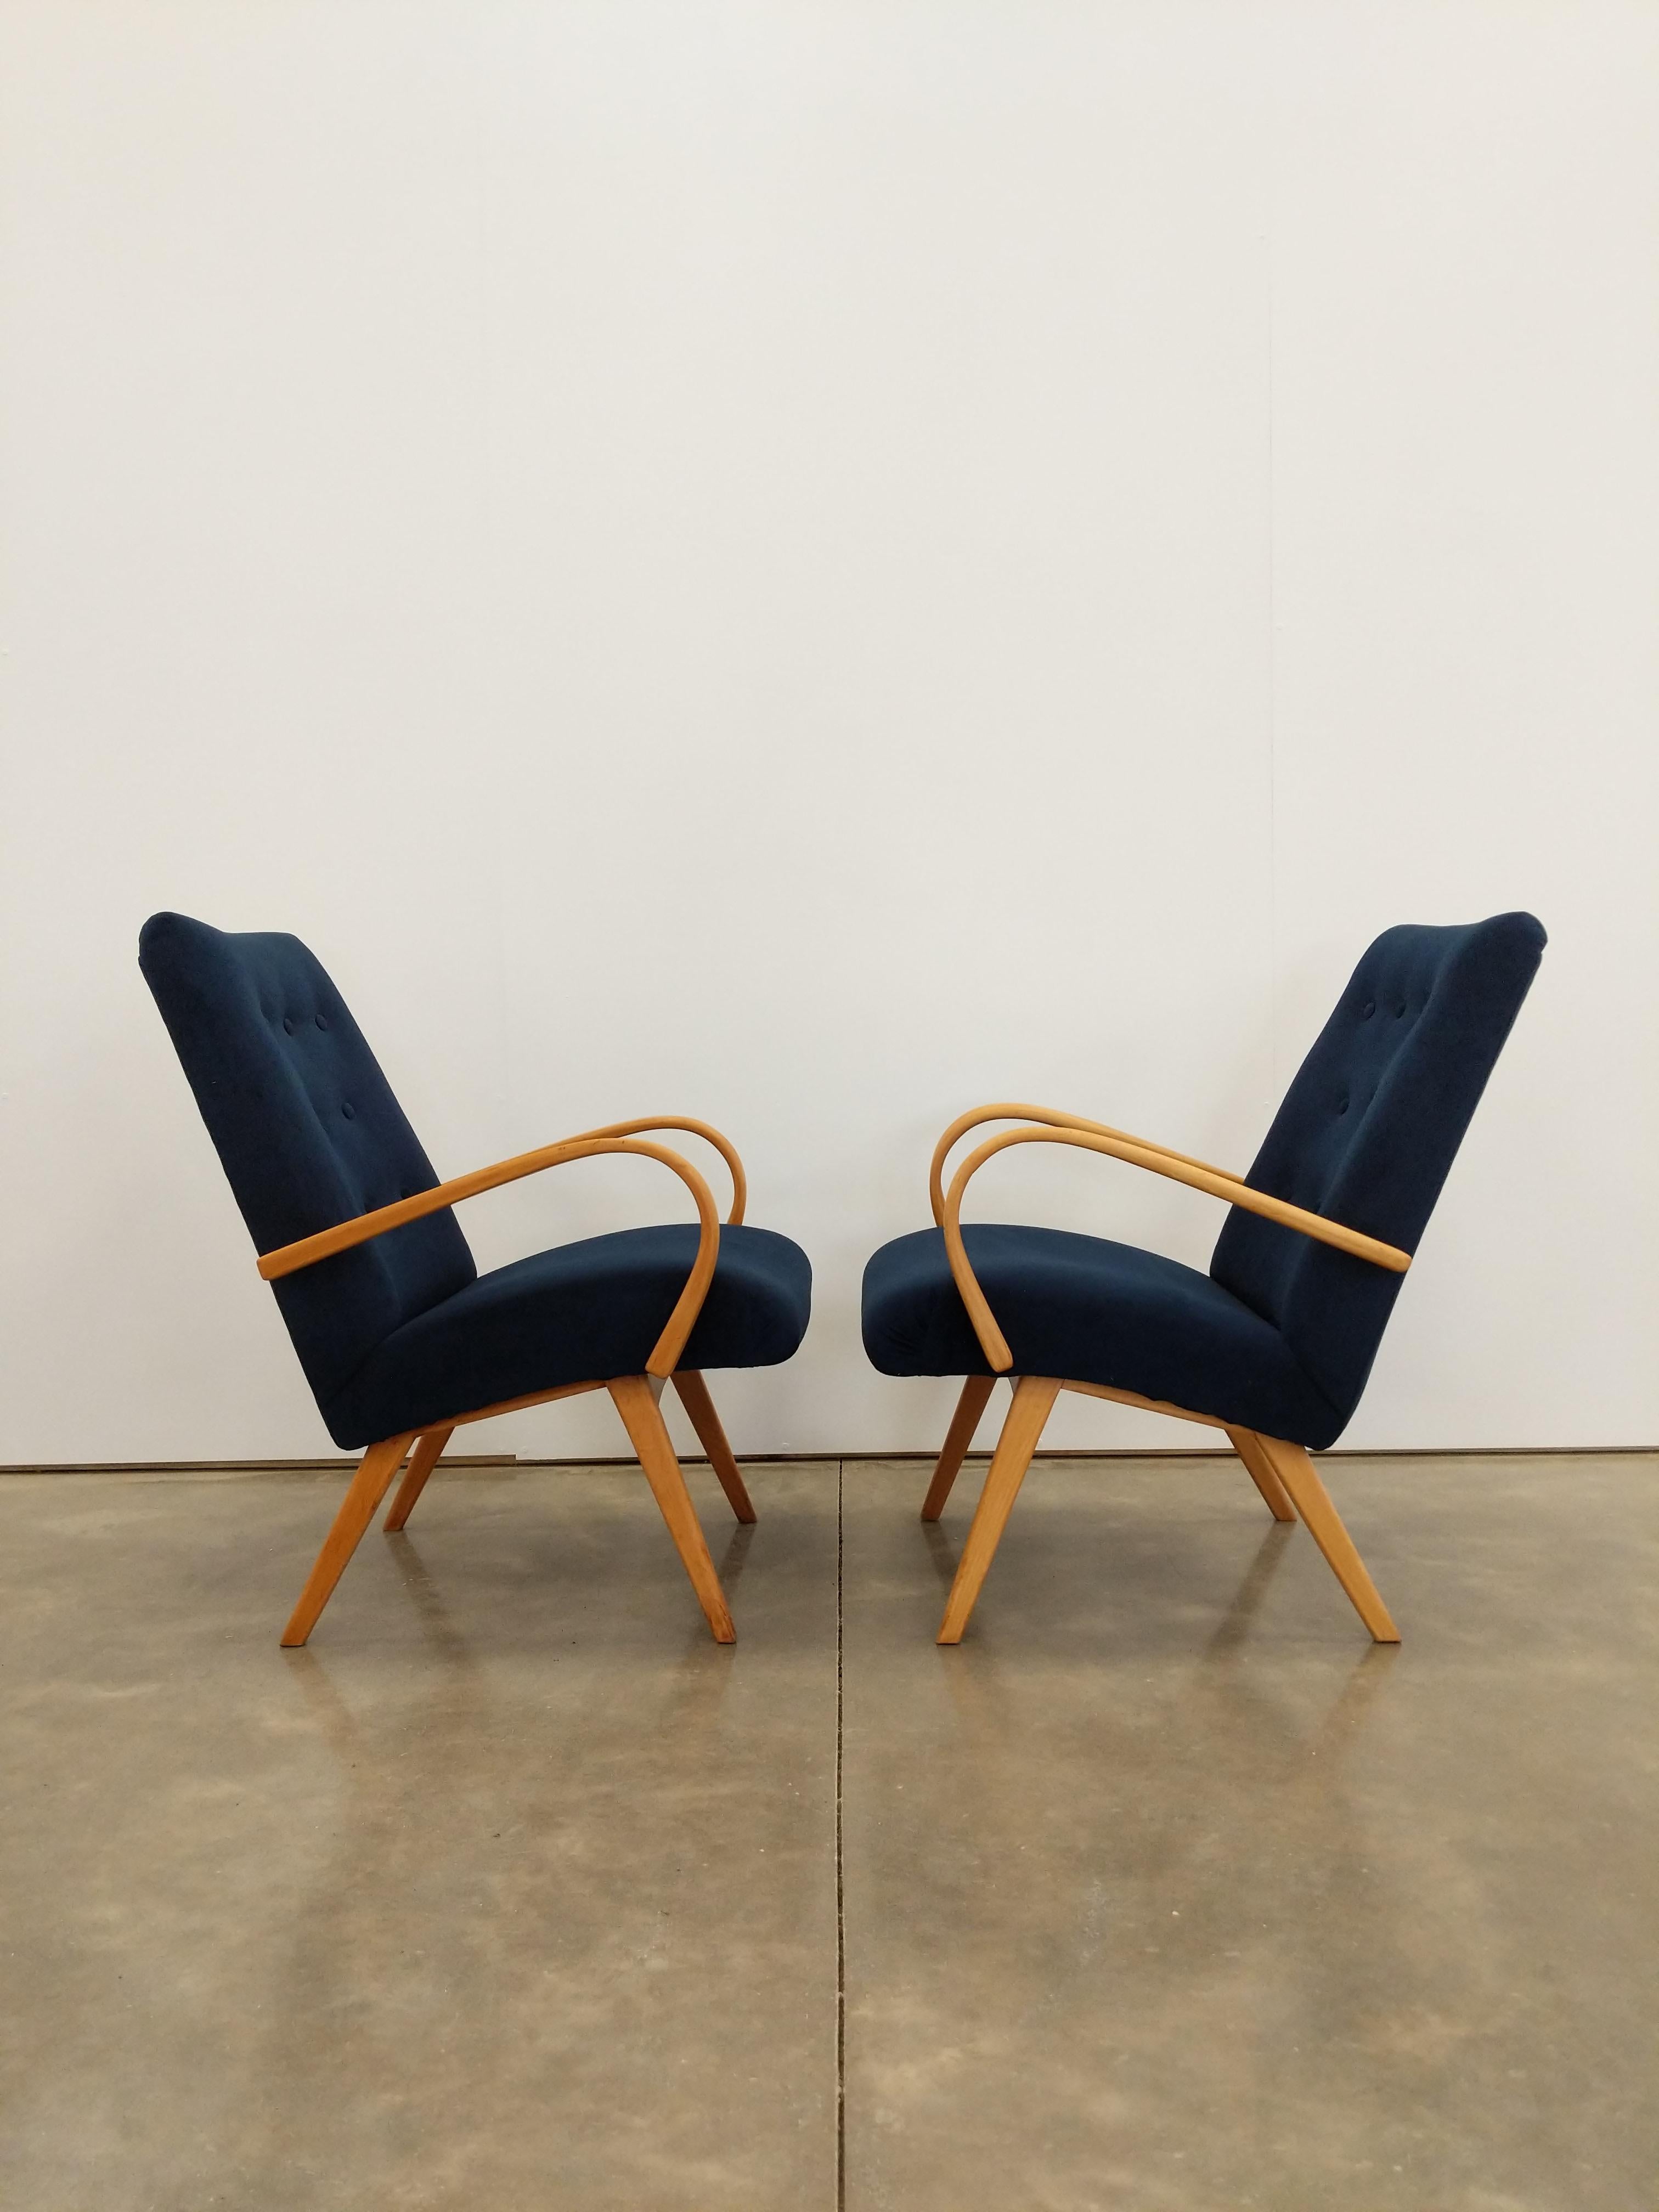 Pair of authentic vintage Czech mid century modern lounge chairs.

Model 53 designed by Jaroslav Smidek for TON.

This set is in great vintage condition with brand new dark blue velvet upholstery and few signs of age-related wear (see photos).

If